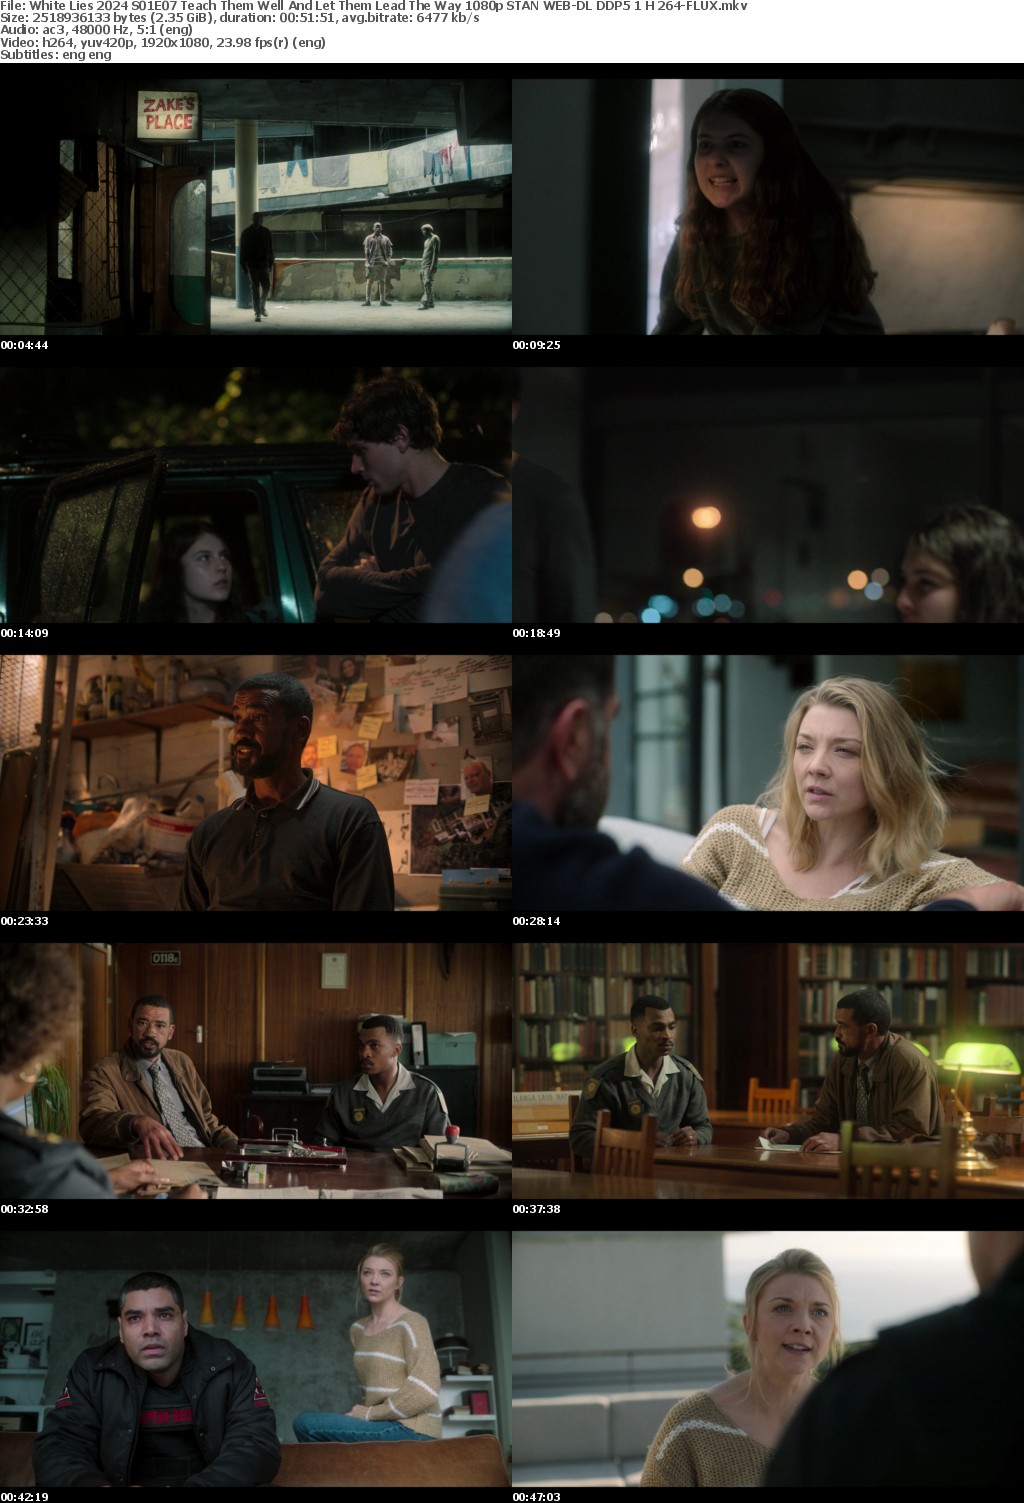 White Lies 2024 S01E07 Teach Them Well And Let Them Lead The Way 1080p STAN WEB-DL DDP5 1 H 264-FLUX